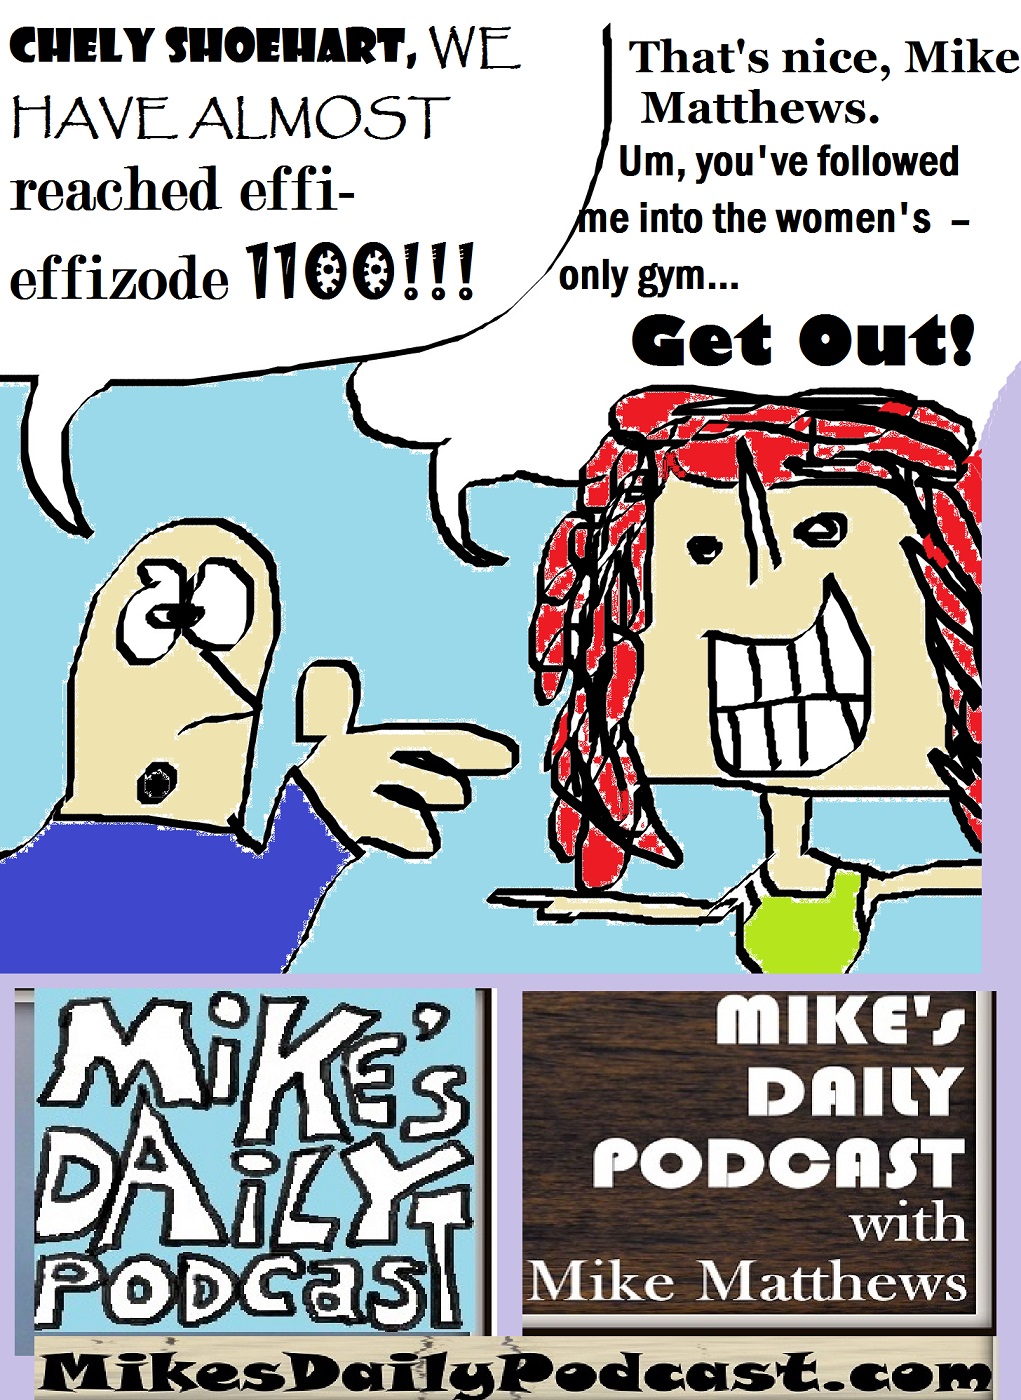 MIKEs DAILY PODCAST 1099 Women Only Gym